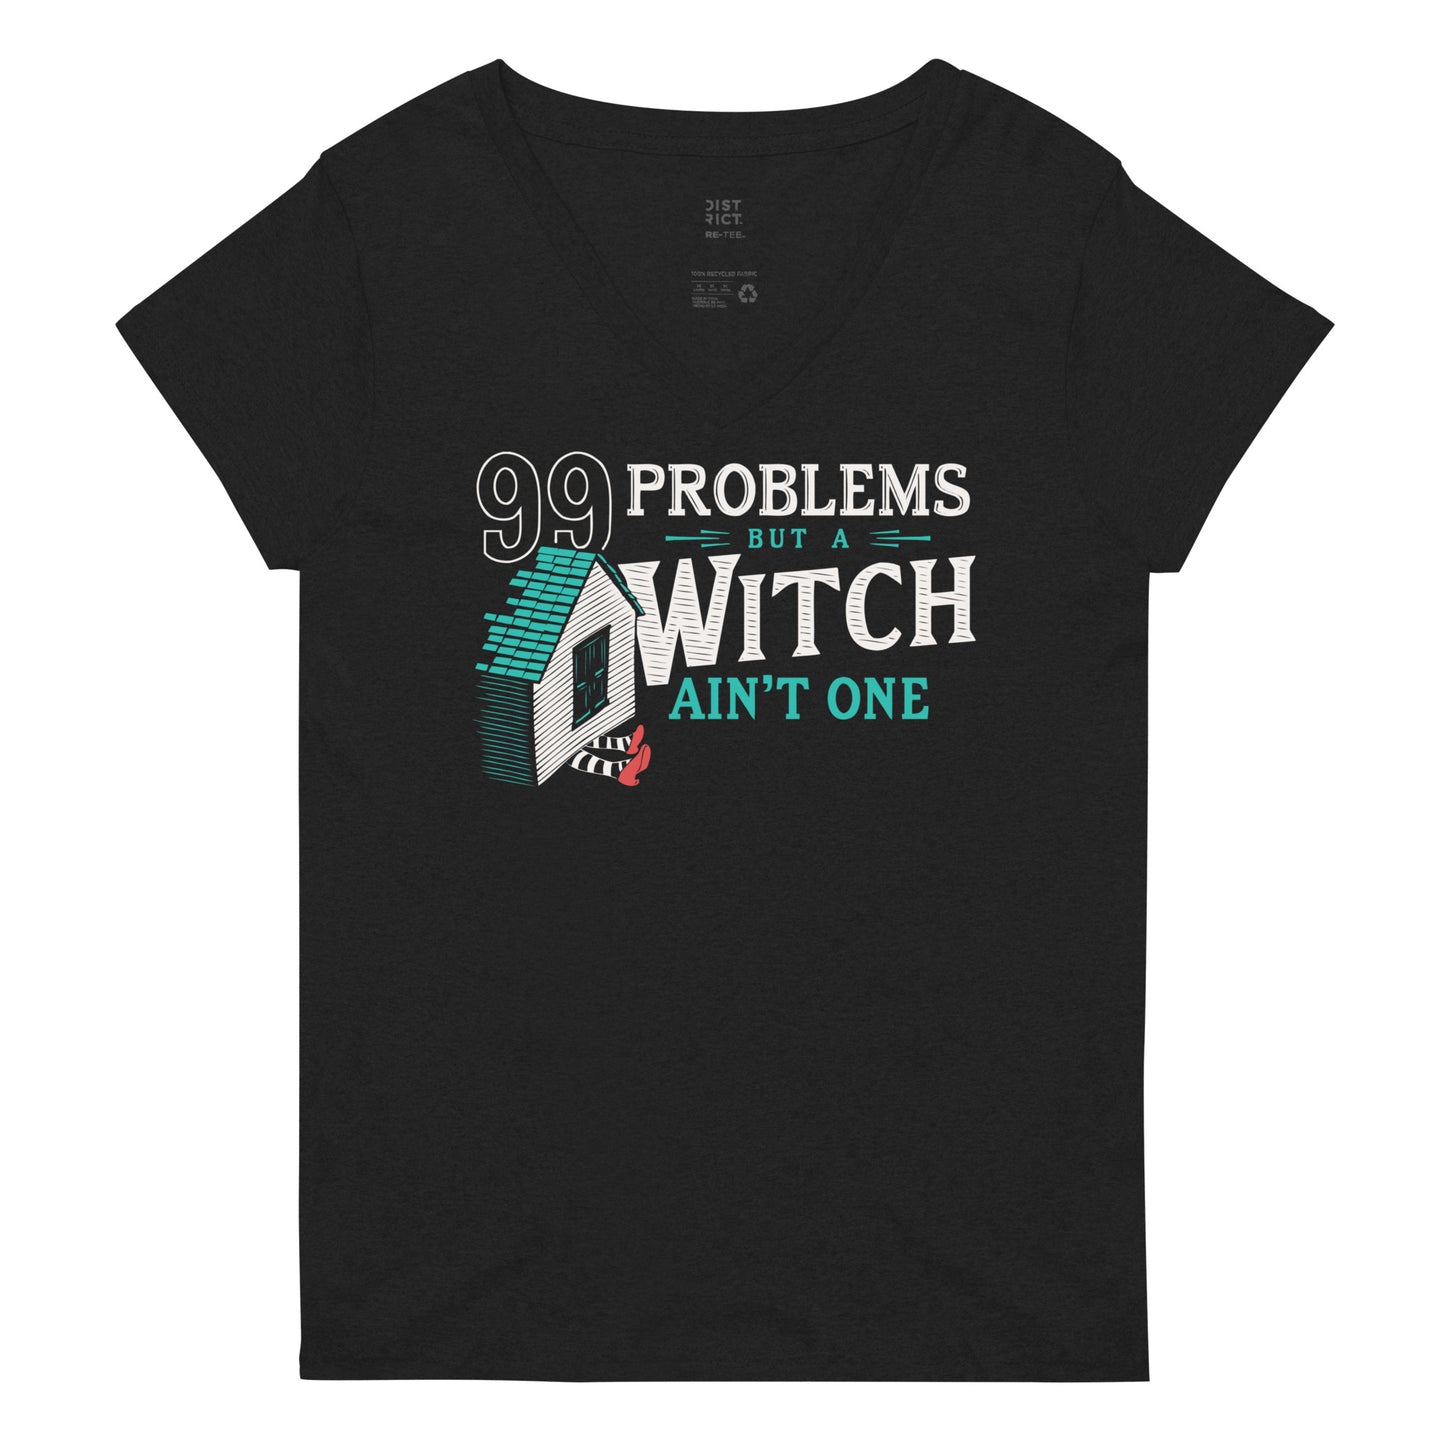 99 Problems But A Witch Ain't One Women's V-Neck Tee